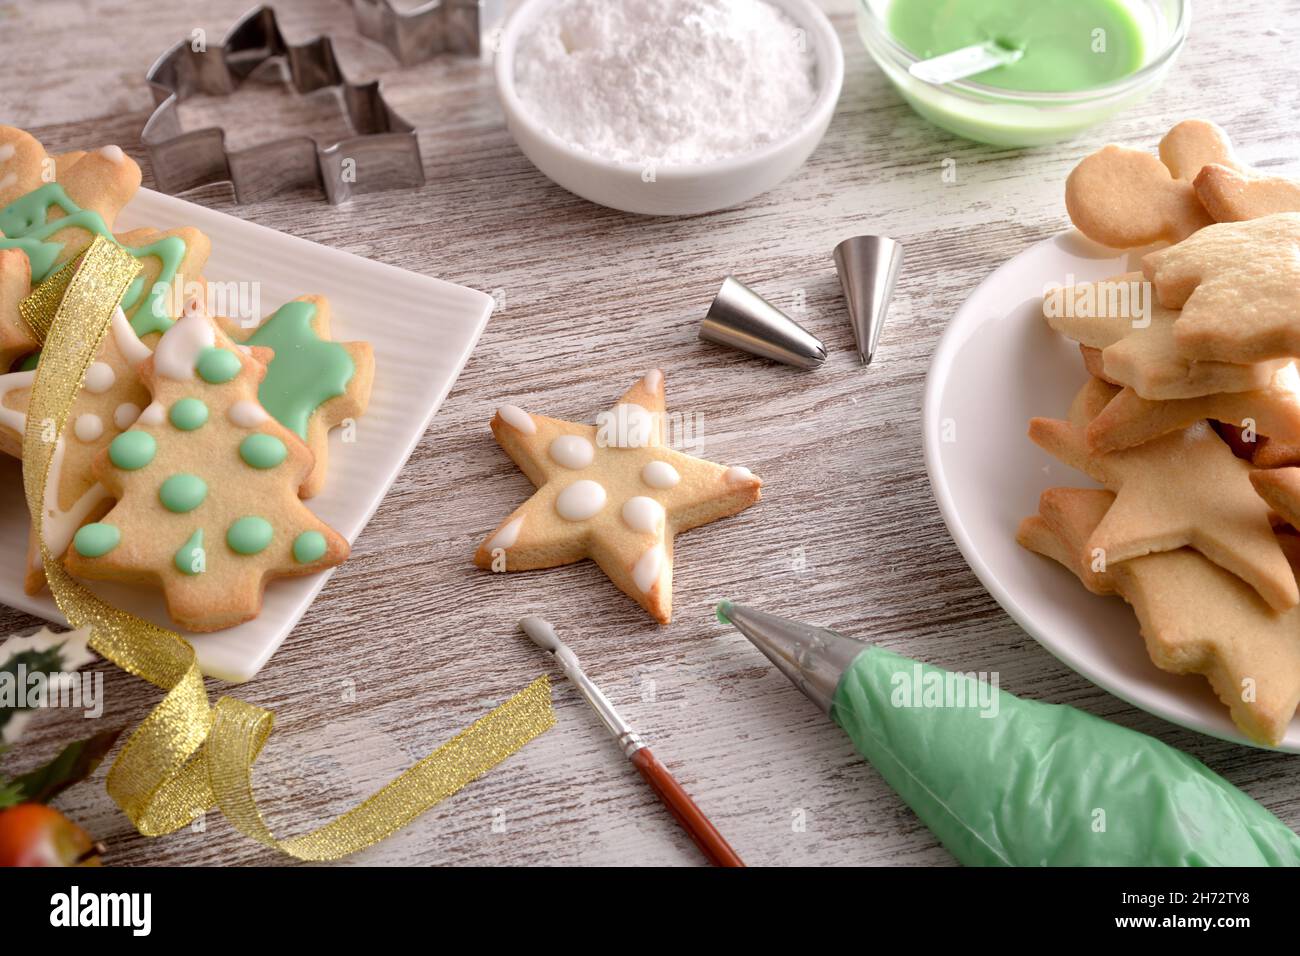 Tools for painting Christmas cookies with icing close up. Elevated view. Horizontal composition. Stock Photo